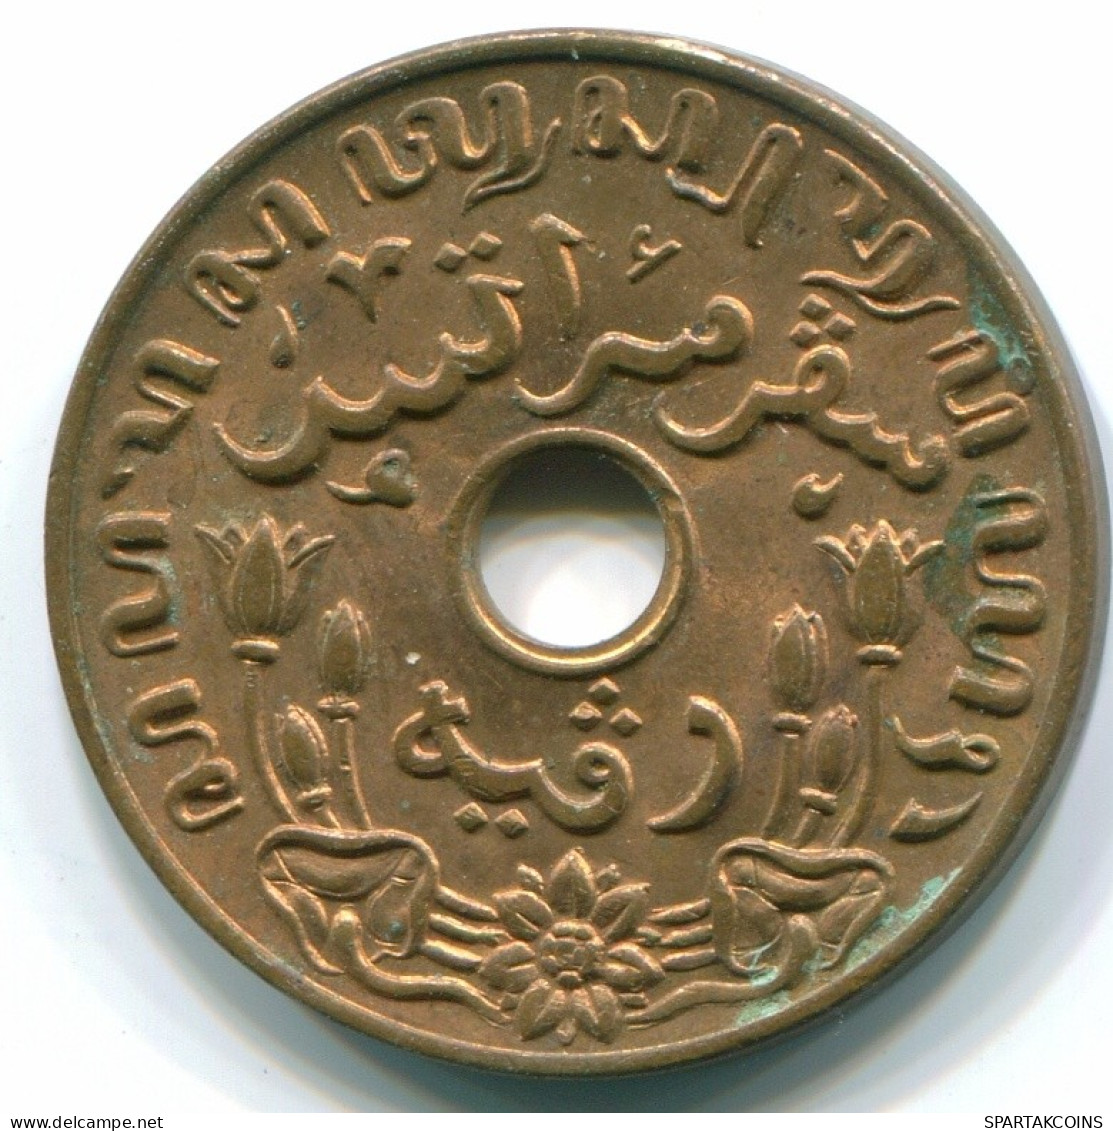 1 CENT 1945 D NETHERLANDS EAST INDIES INDONESIA Bronze Colonial Coin #S10431.U.A - Indie Olandesi